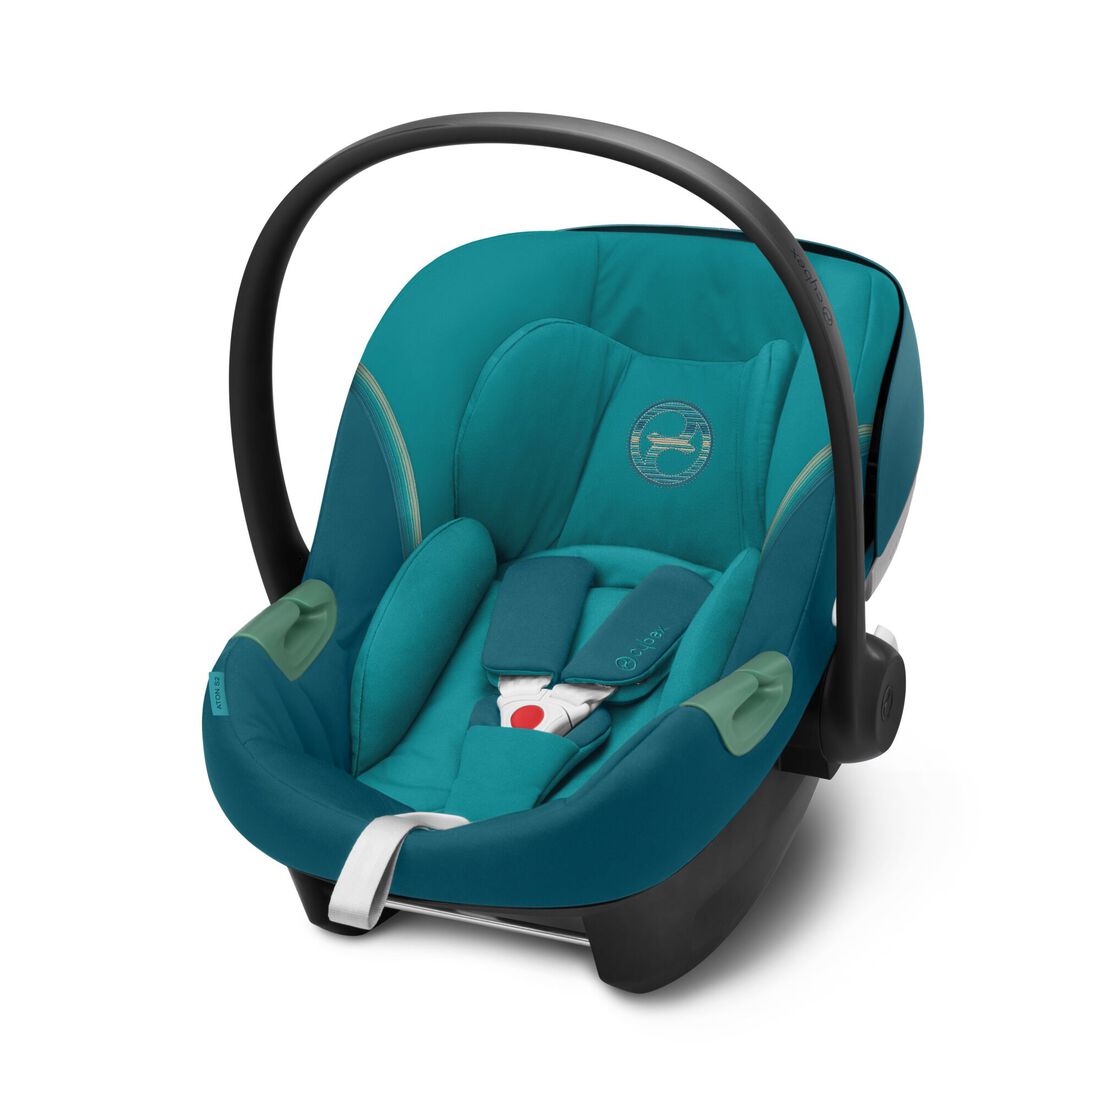 Cybex Aton S2 I Size River Blue For Eur 189 95 - Cybex Infant Car Seat Sun Shade